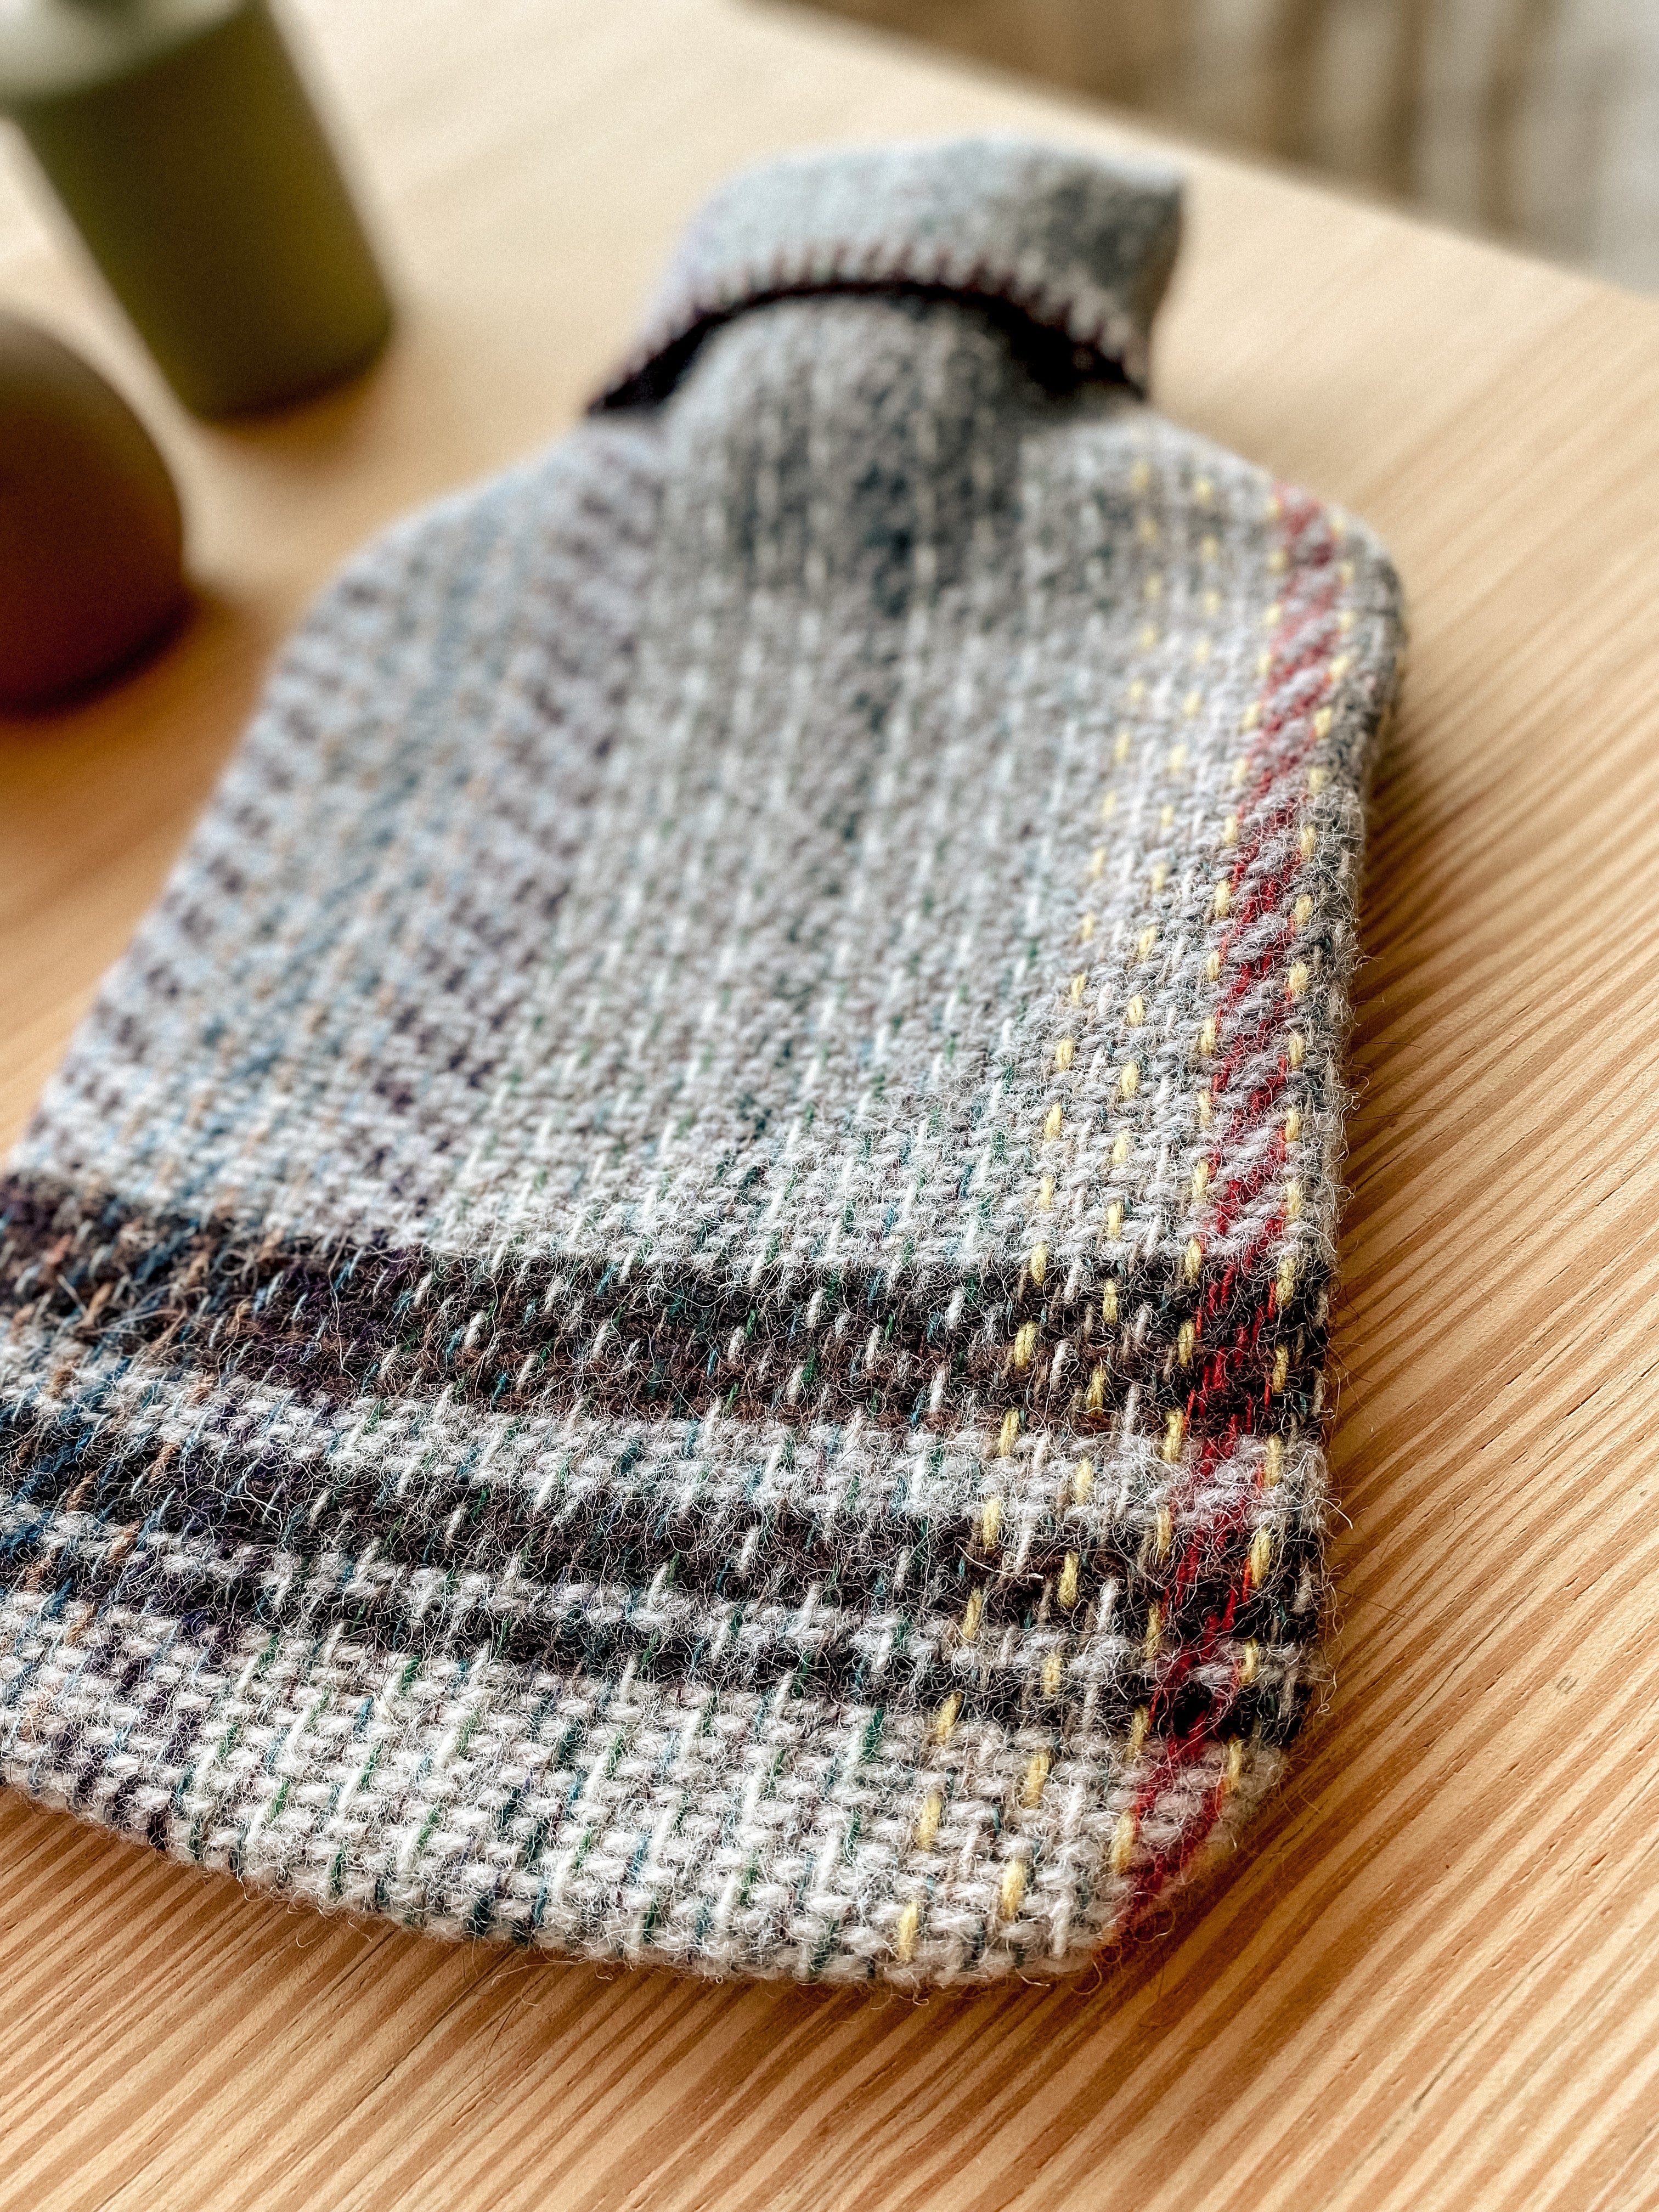 Hot water bottle made from recycled wool